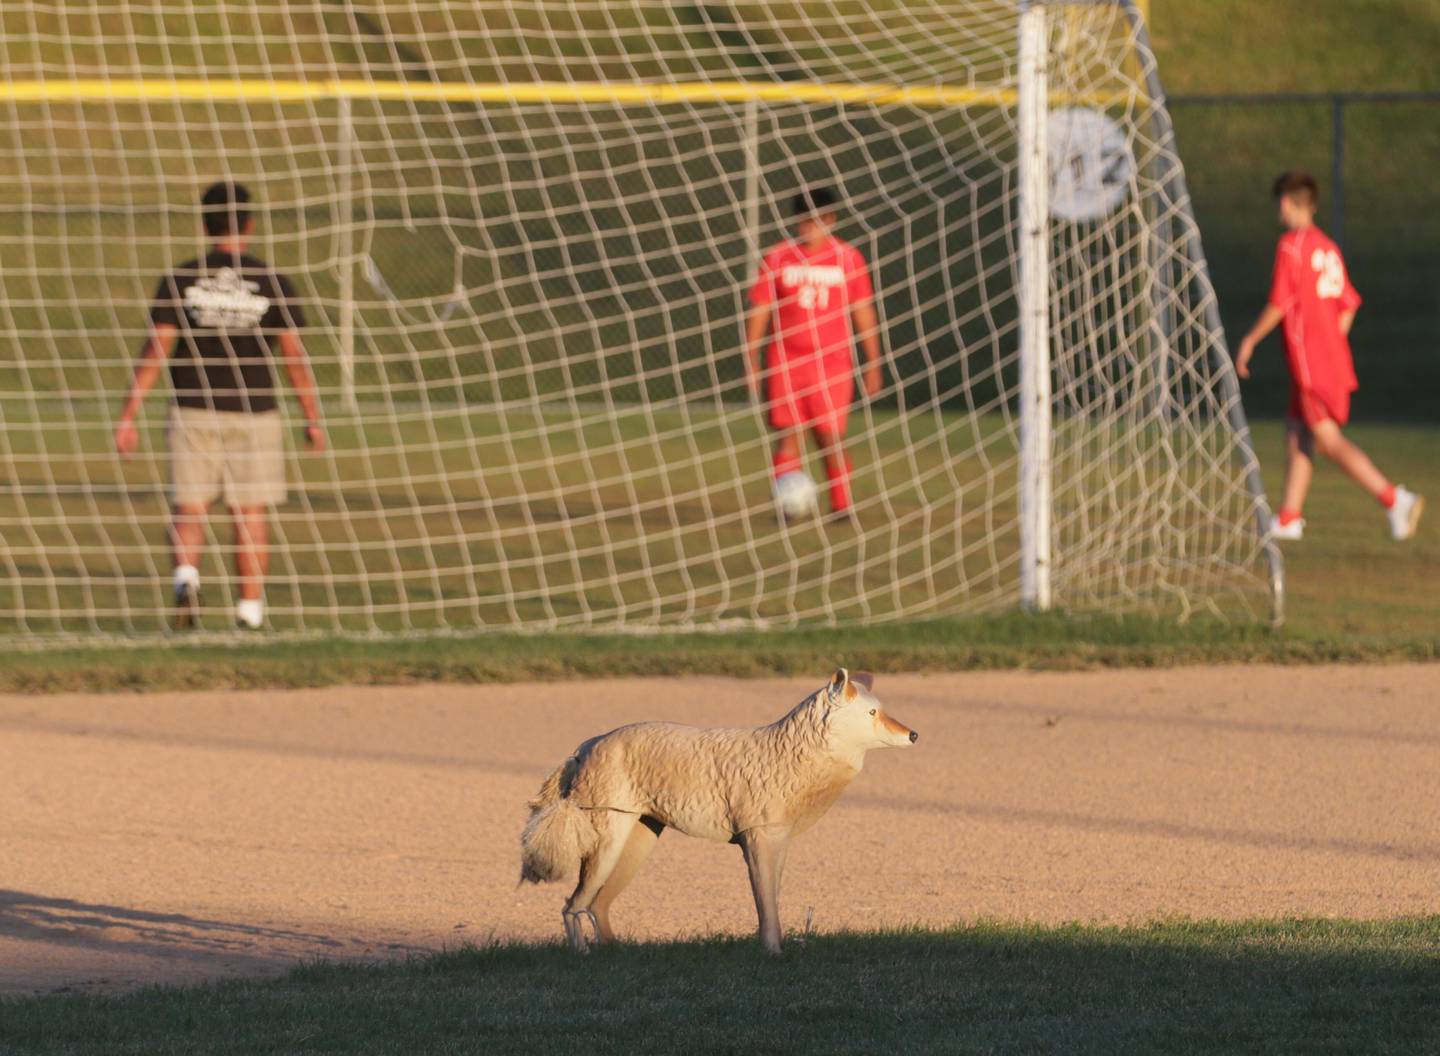 A coyote decoy is placed behind second base the baseball diamond during the soccer game between L-P and Ottawa on Monday, Oct. 3, 2022 at Ottawa High School.